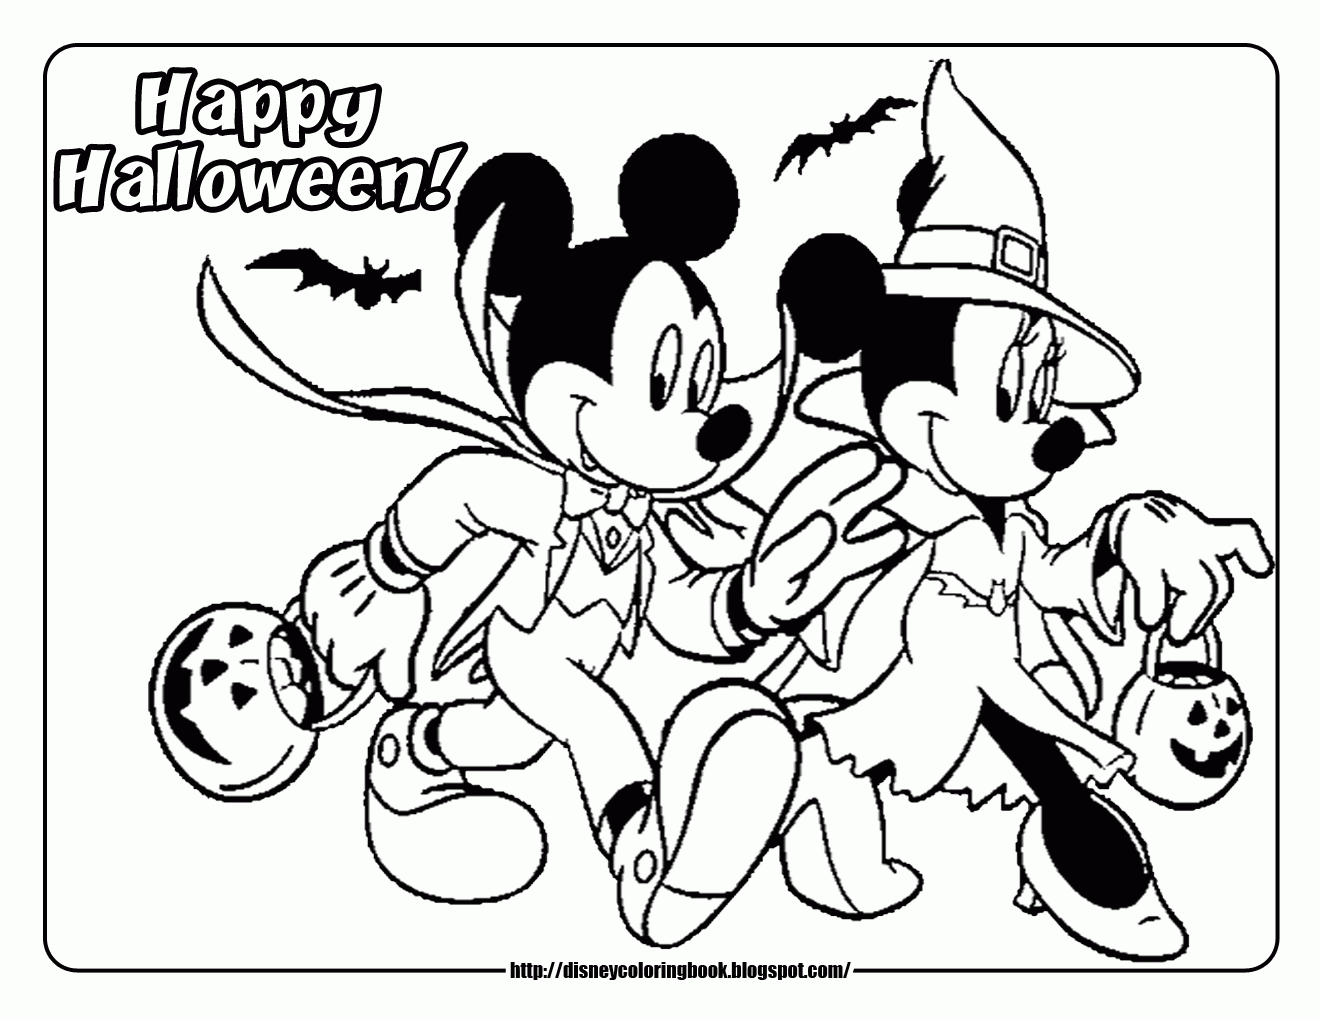 Mickey Friends Halloween Disney Coloring Pages - Colorine.net | #2238